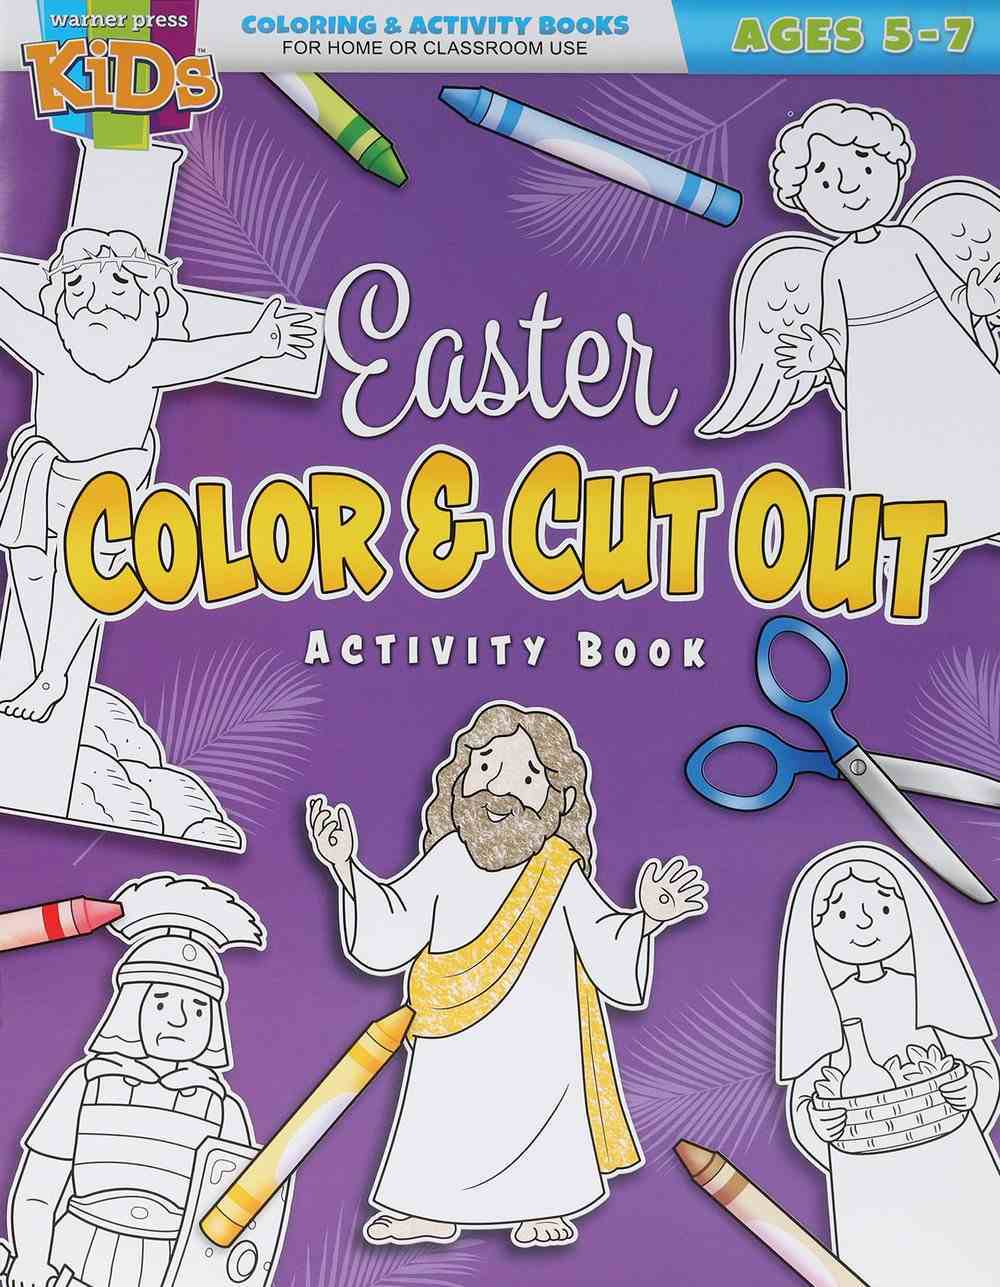 Easter Color & Cut Out Activity Book (Ages 5-7) (Warner Press Colouring & Activity Books Series) Paperback